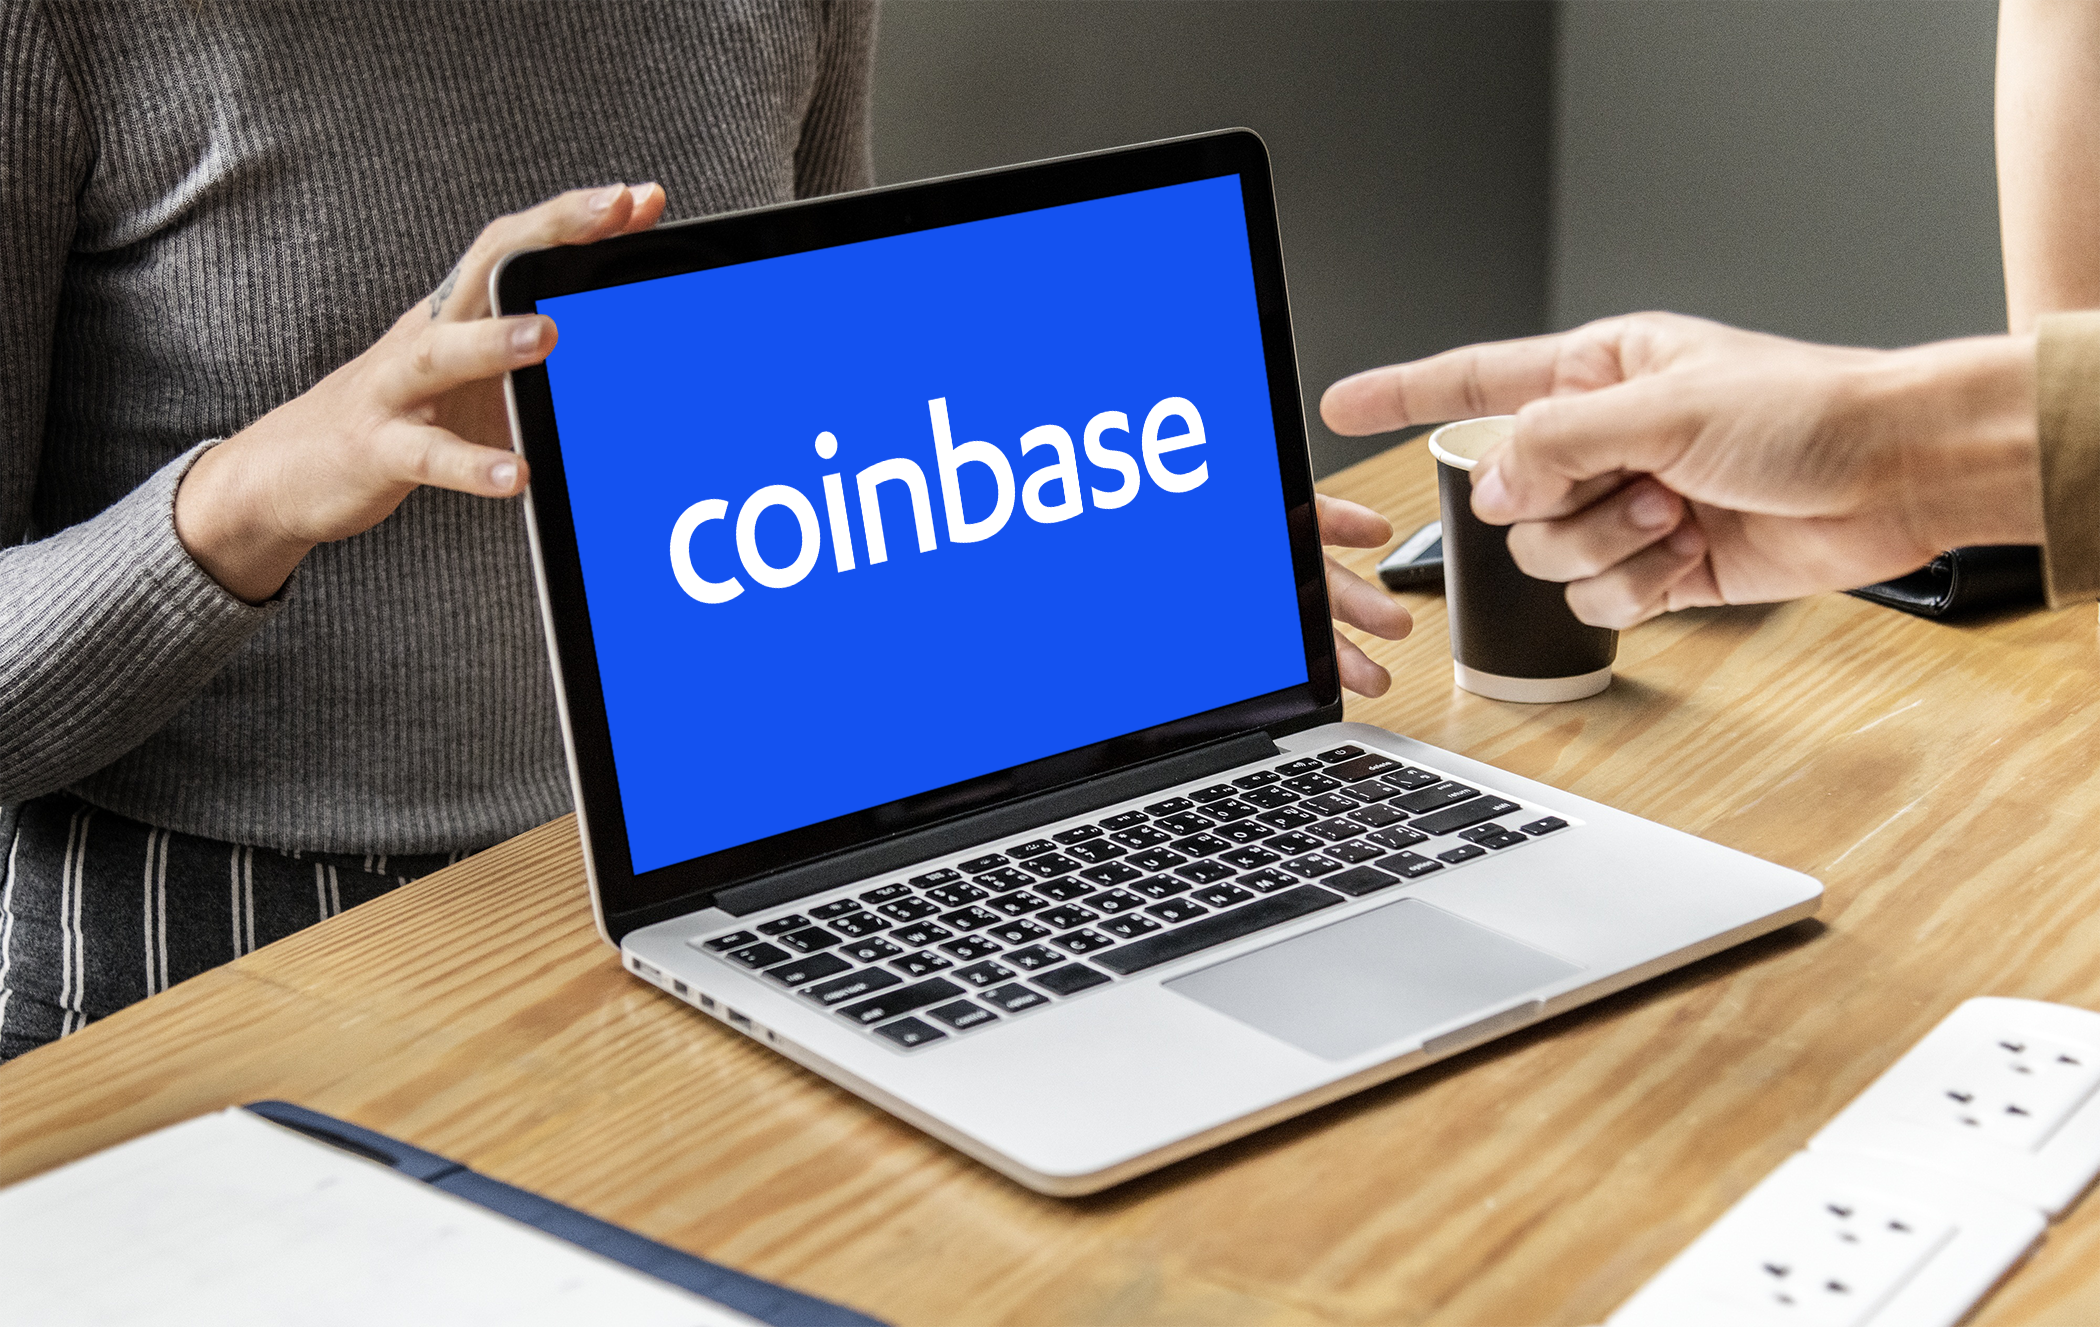 ipo coinbase date)